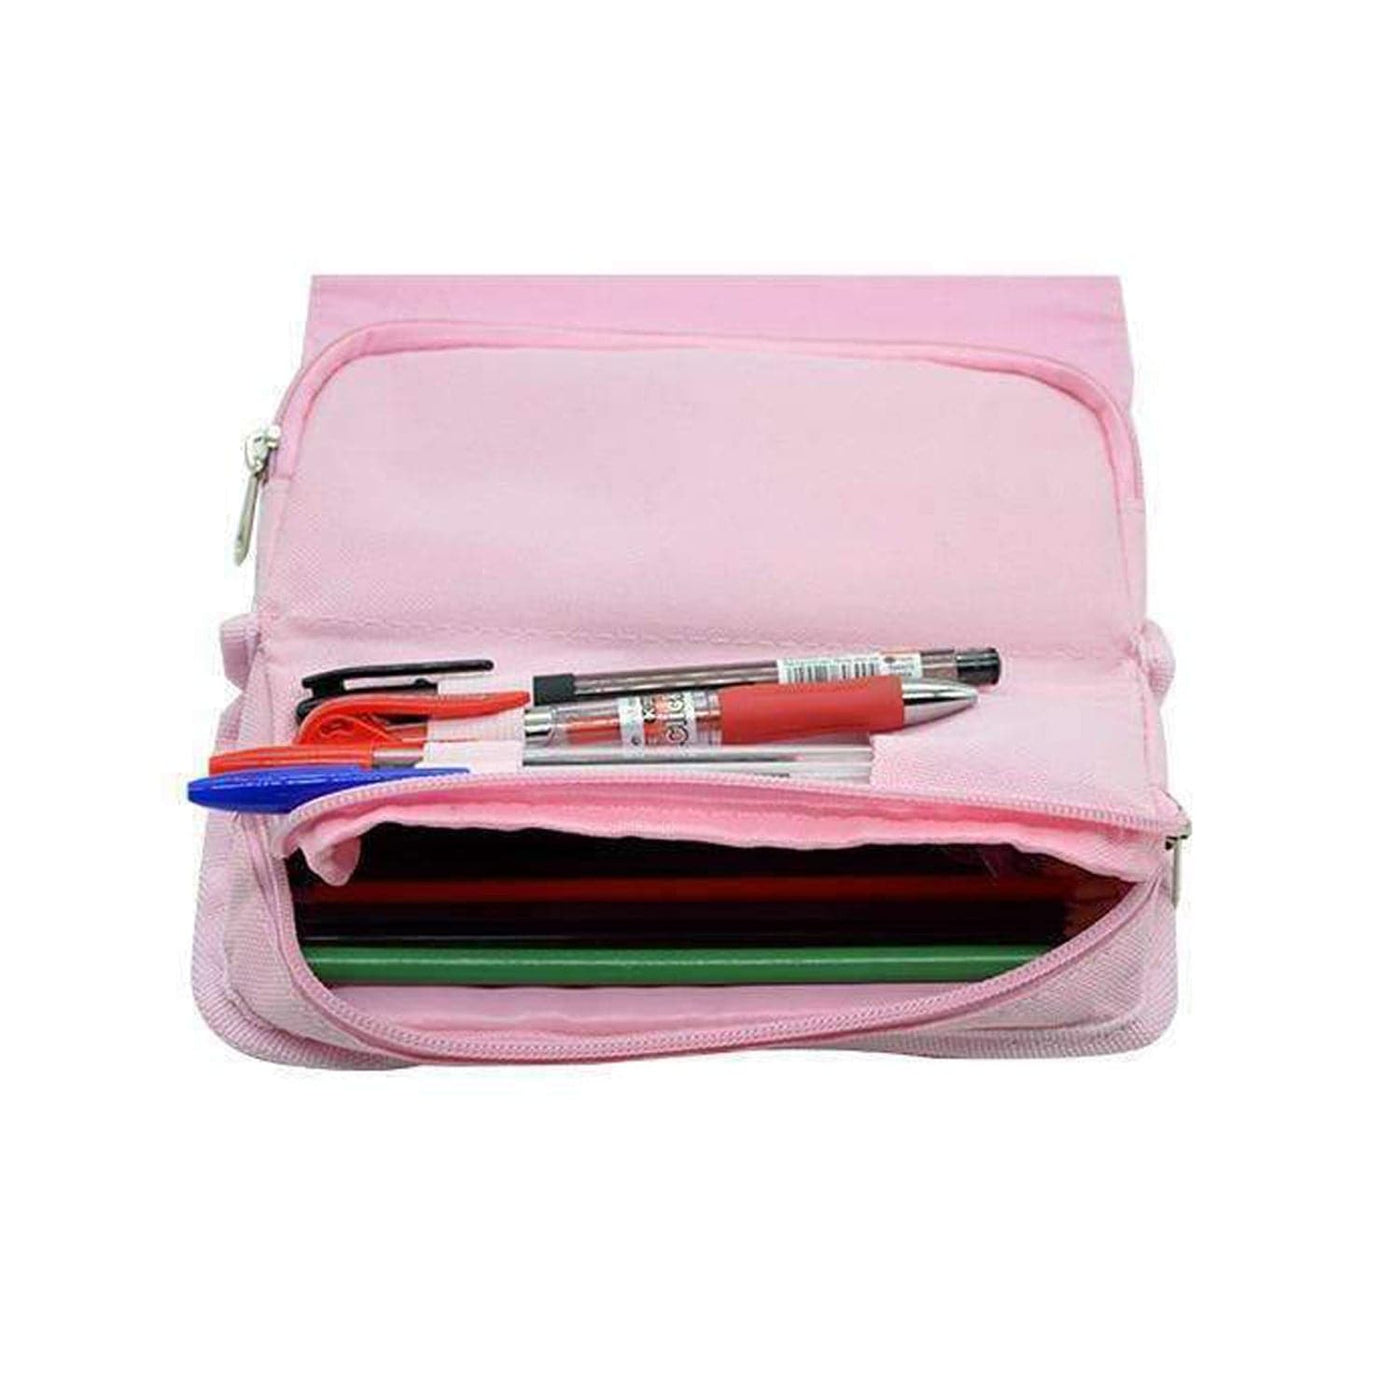 Colourful Hibiscus Pattern Pencil Case